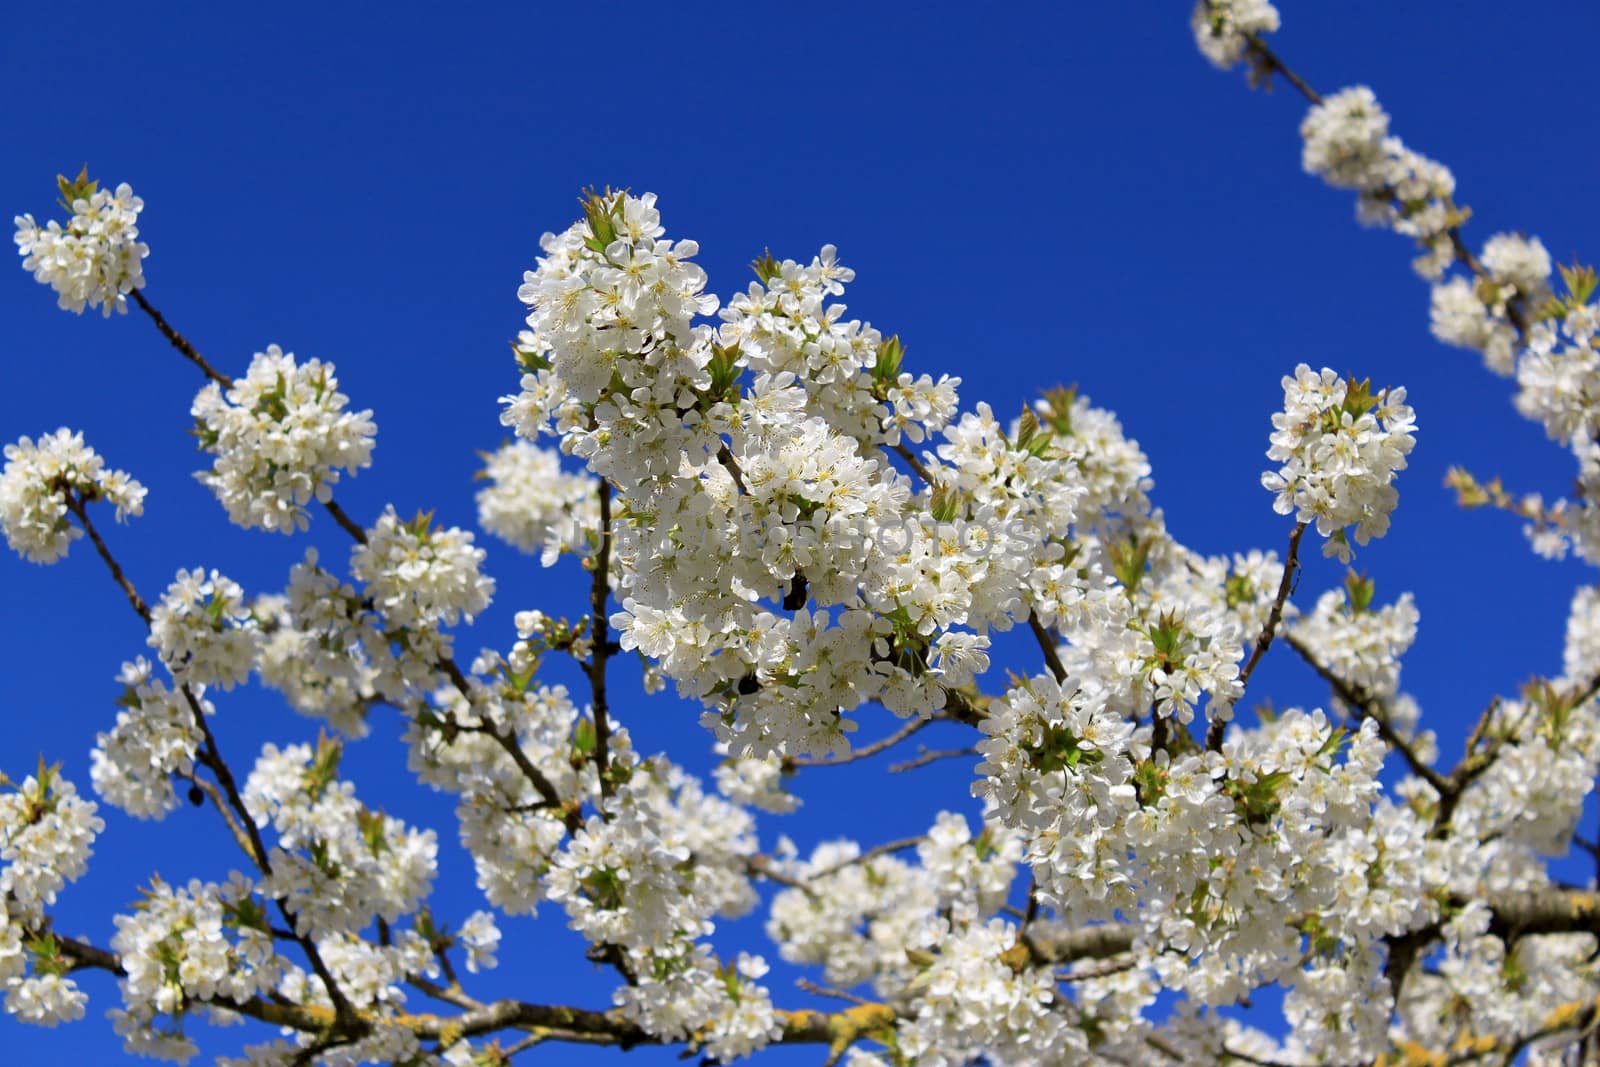 a cherry tree in spring with flowering white flowers and the appearance of the pistil